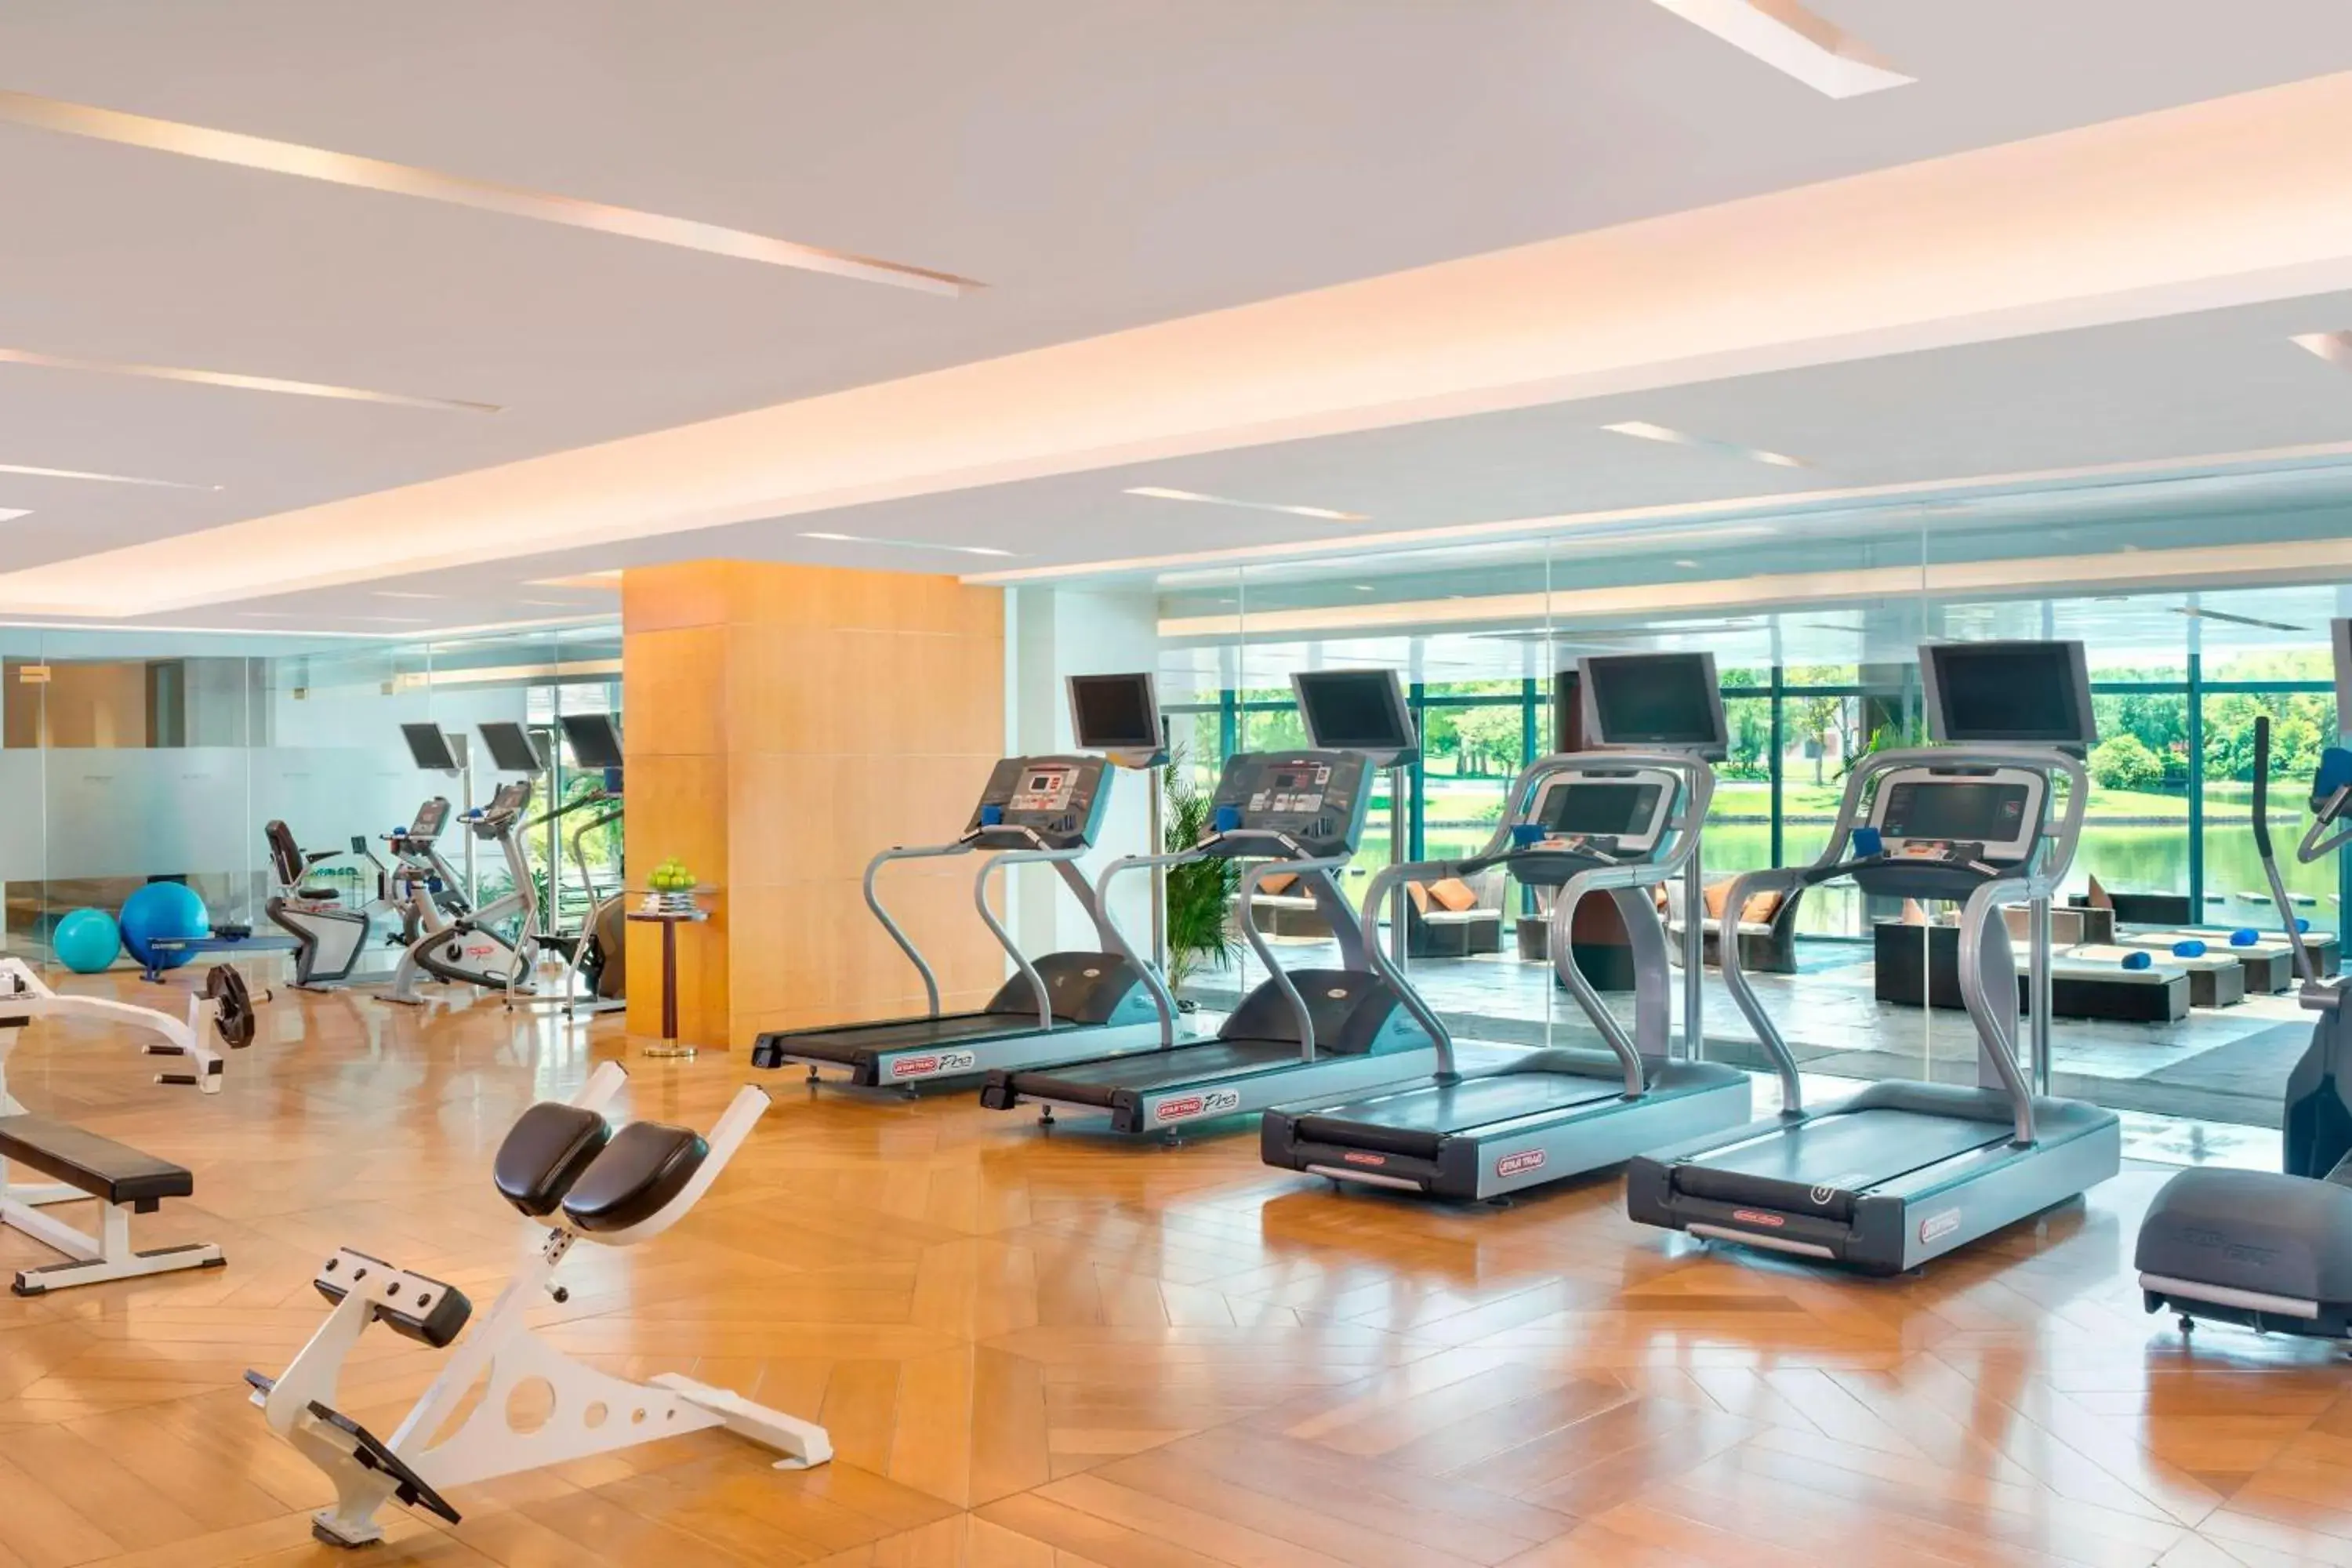 Fitness centre/facilities, Fitness Center/Facilities in The Yuluxe Sheshan, Shanghai, A Tribute Portfolio Hotel